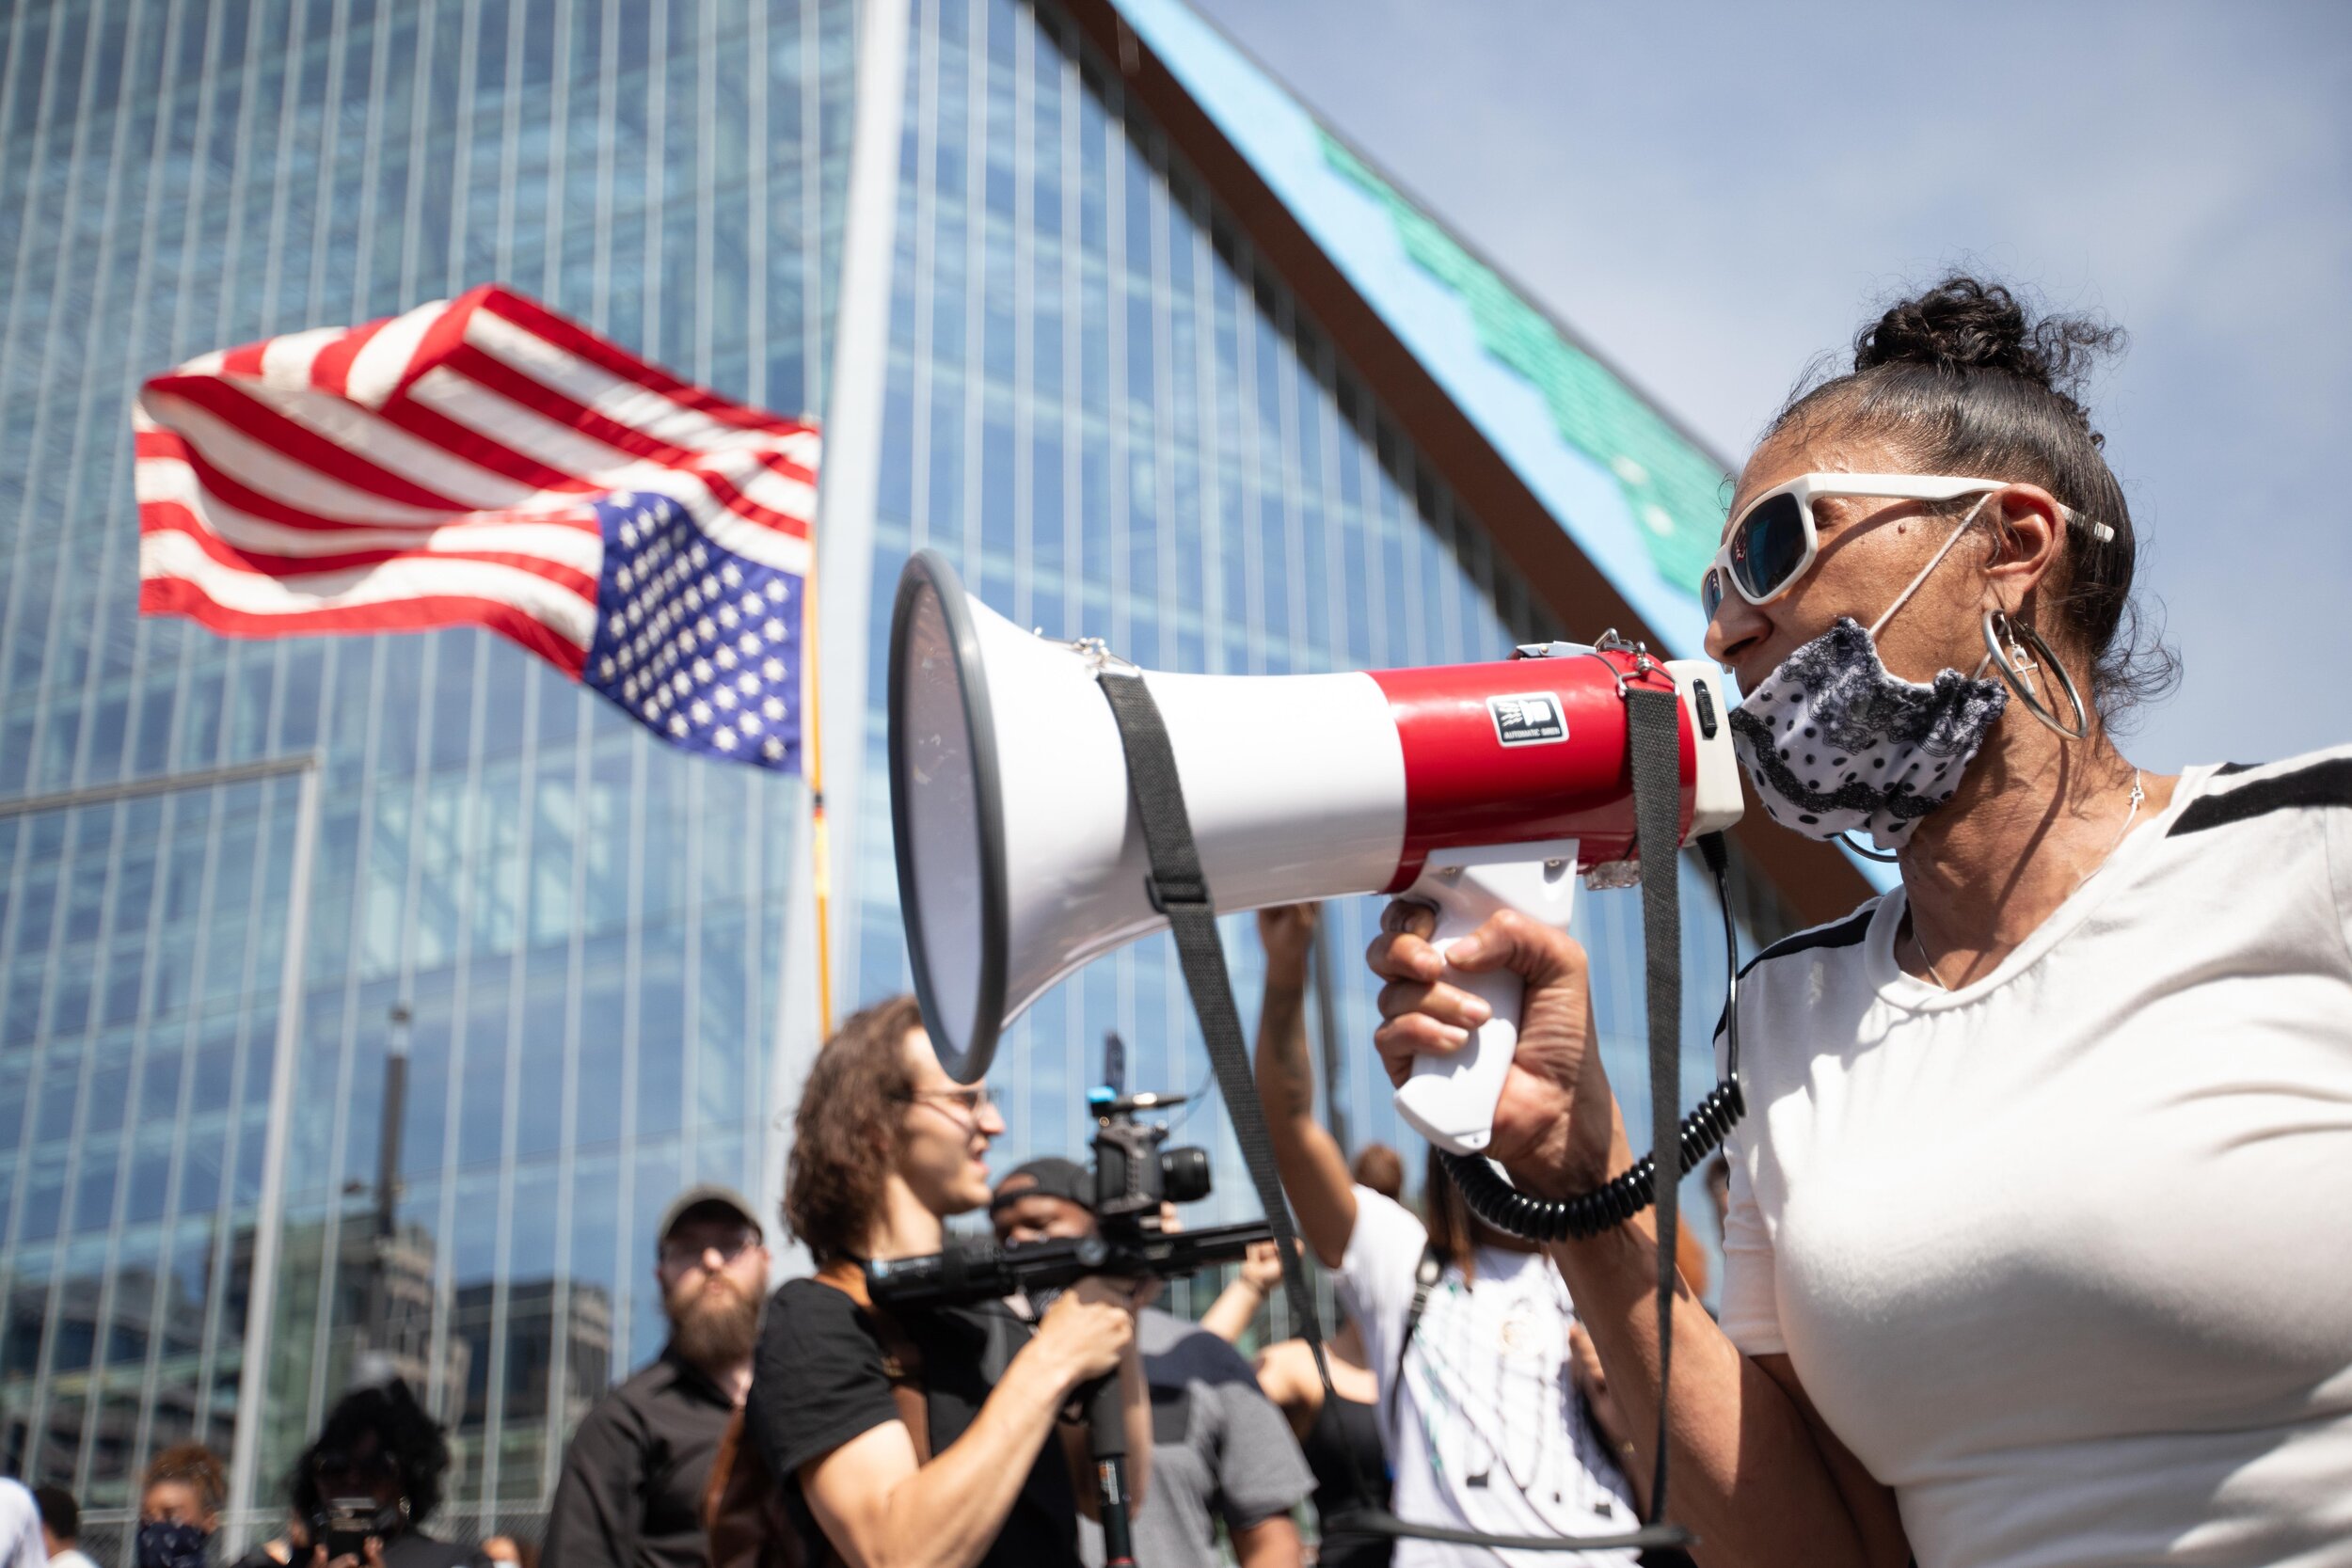  A protester screams into the microphone during a protest over the police killing of George Floyd in front of the U.S. Bank Stadium in Minneapolis, Minnesota on May 31, 2020. Chris Juhn/Zenger 